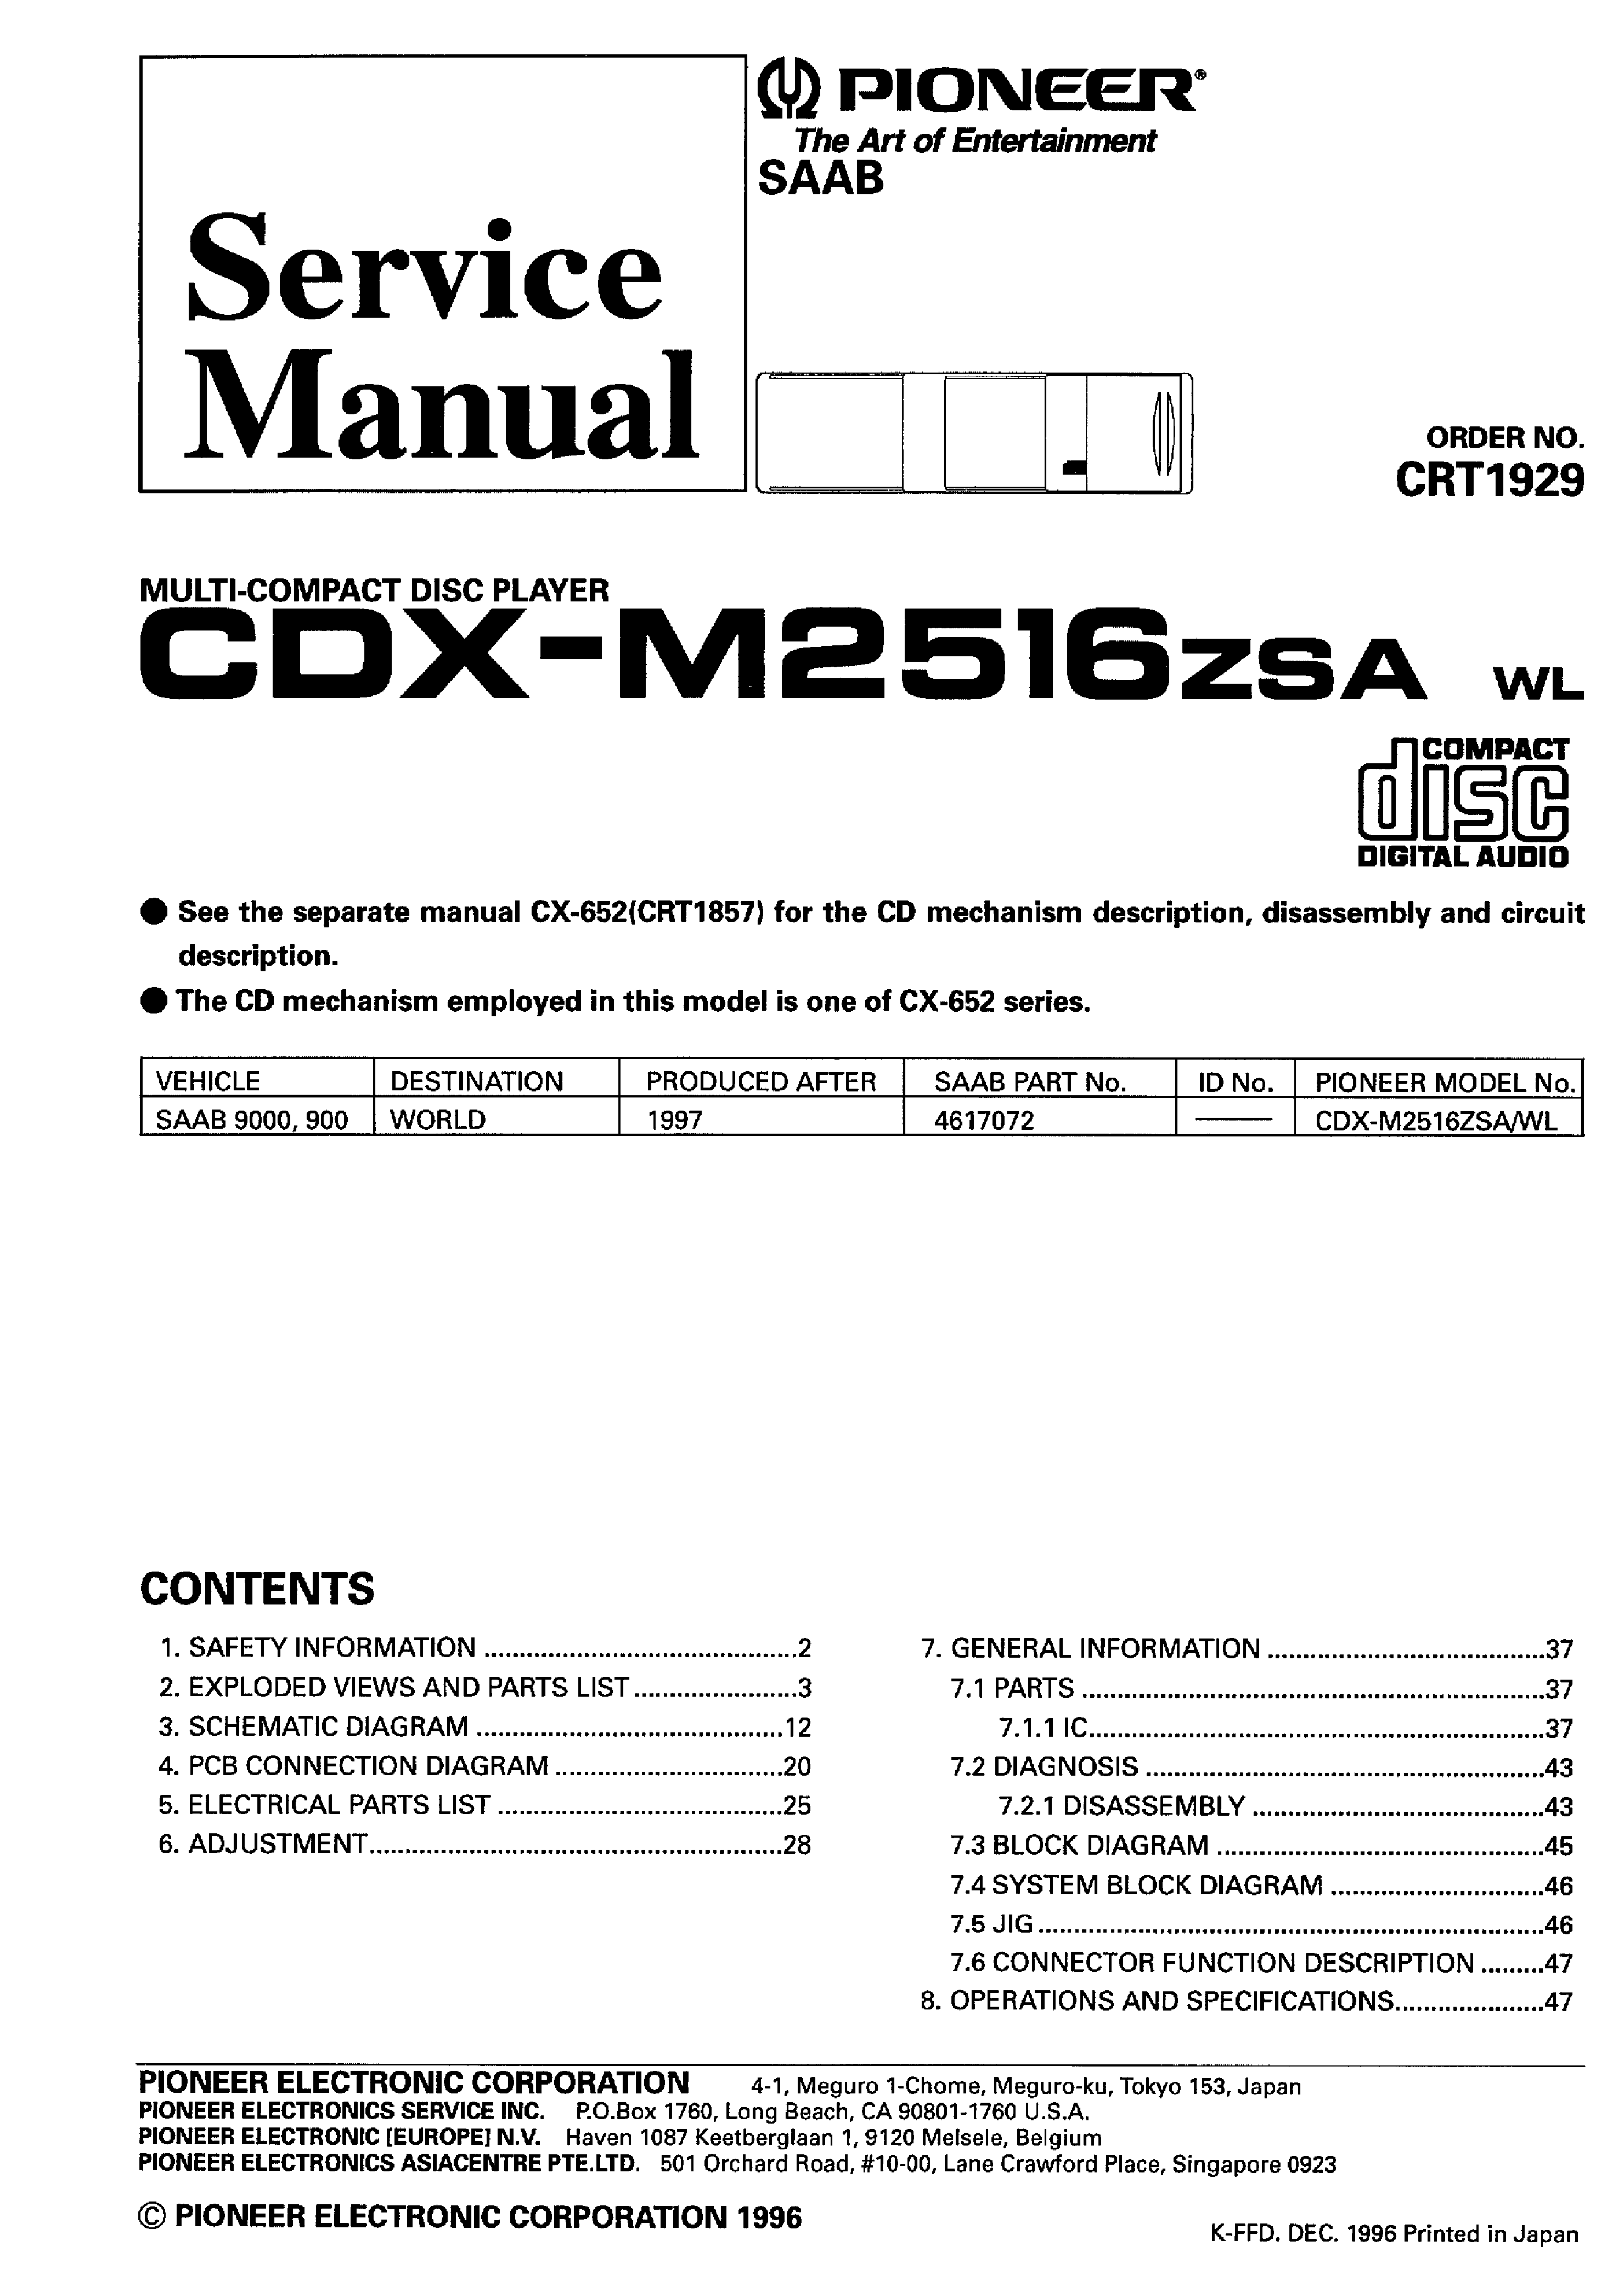 PIONEER CDX-M2516ZSA CRT1929 service manual (1st page)